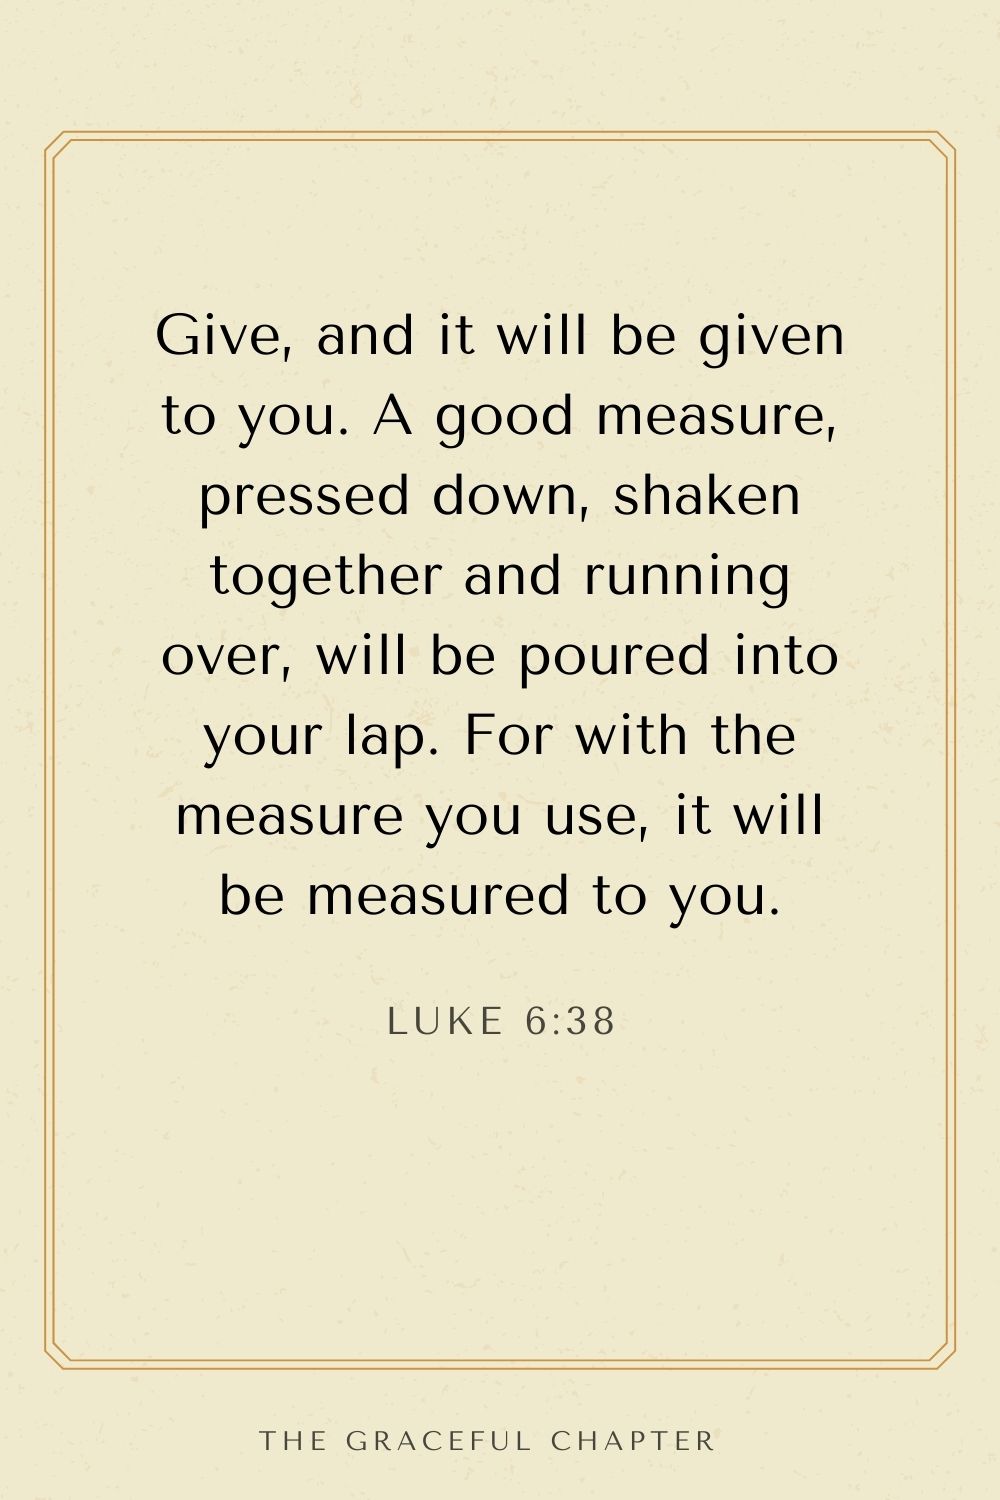 Give, and it will be given to you. A good measure, pressed down, shaken together and running over, will be poured into your lap. For with the measure you use, it will be measured to you. Luke 6:38